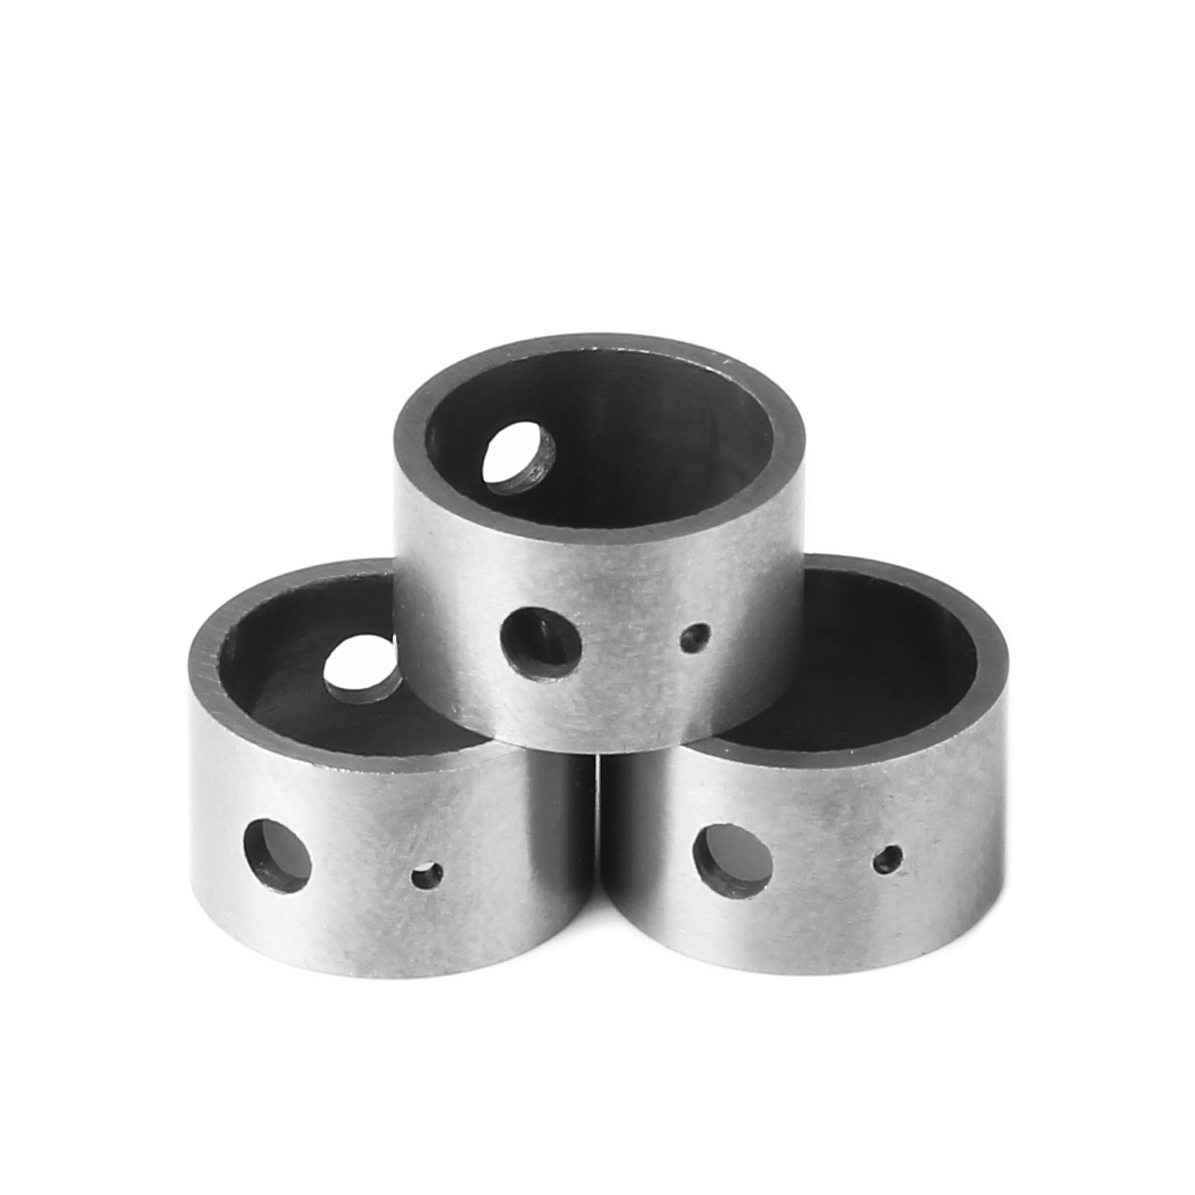 Non-Standard Customized Molds Tool Parts And Wear Parts